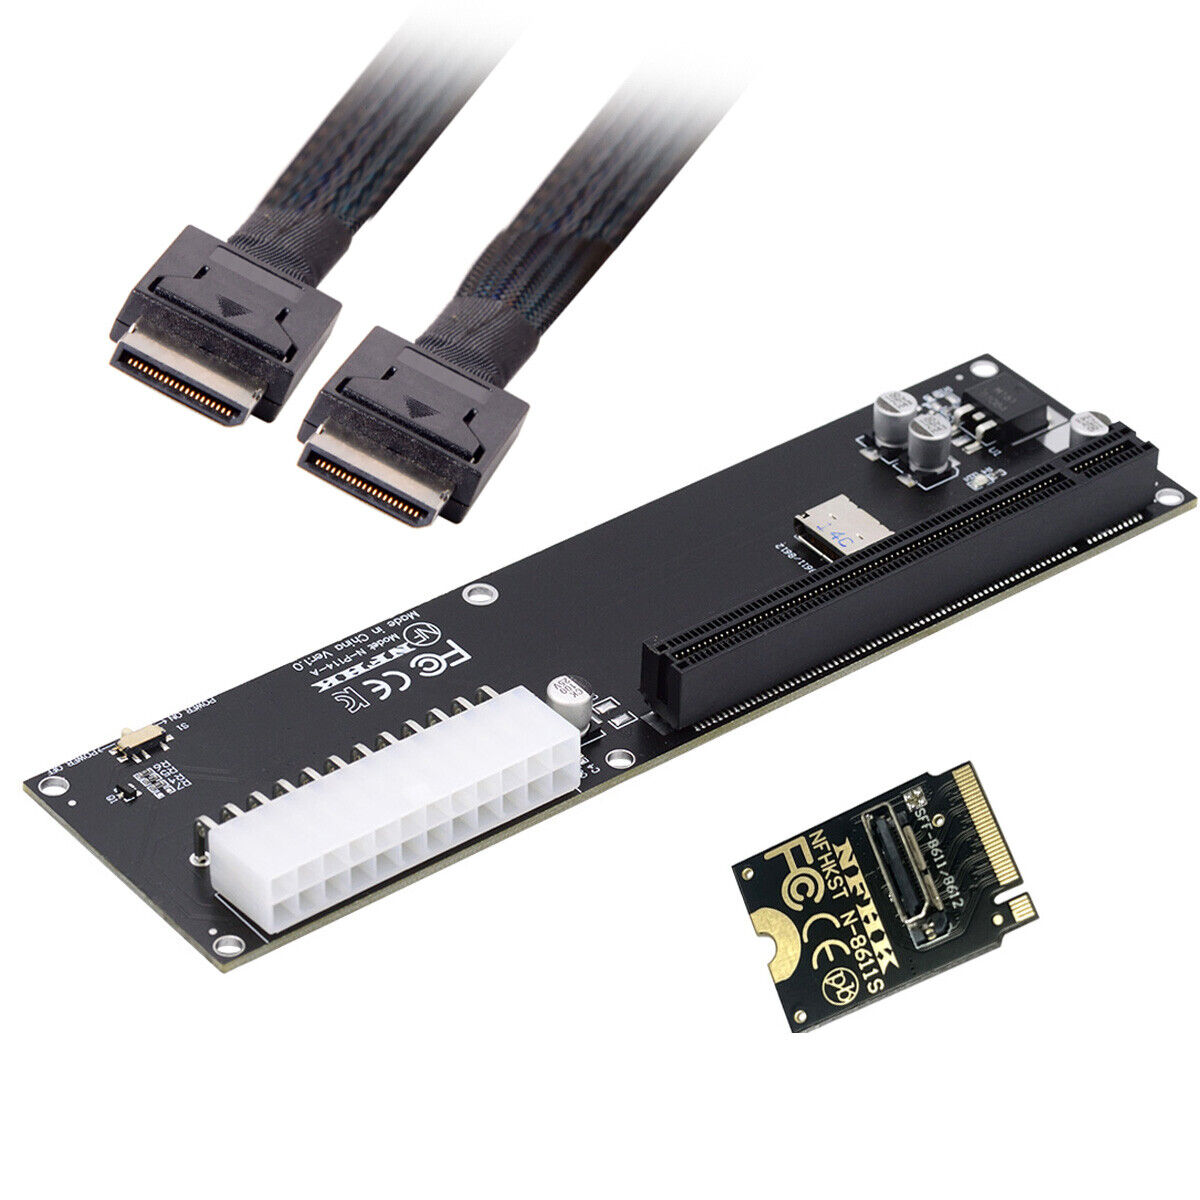 Chenyang PCI-E 3.0 M.2 M-key to Oculink SFF-8612 SFF-8611 Host Adapter for GPD